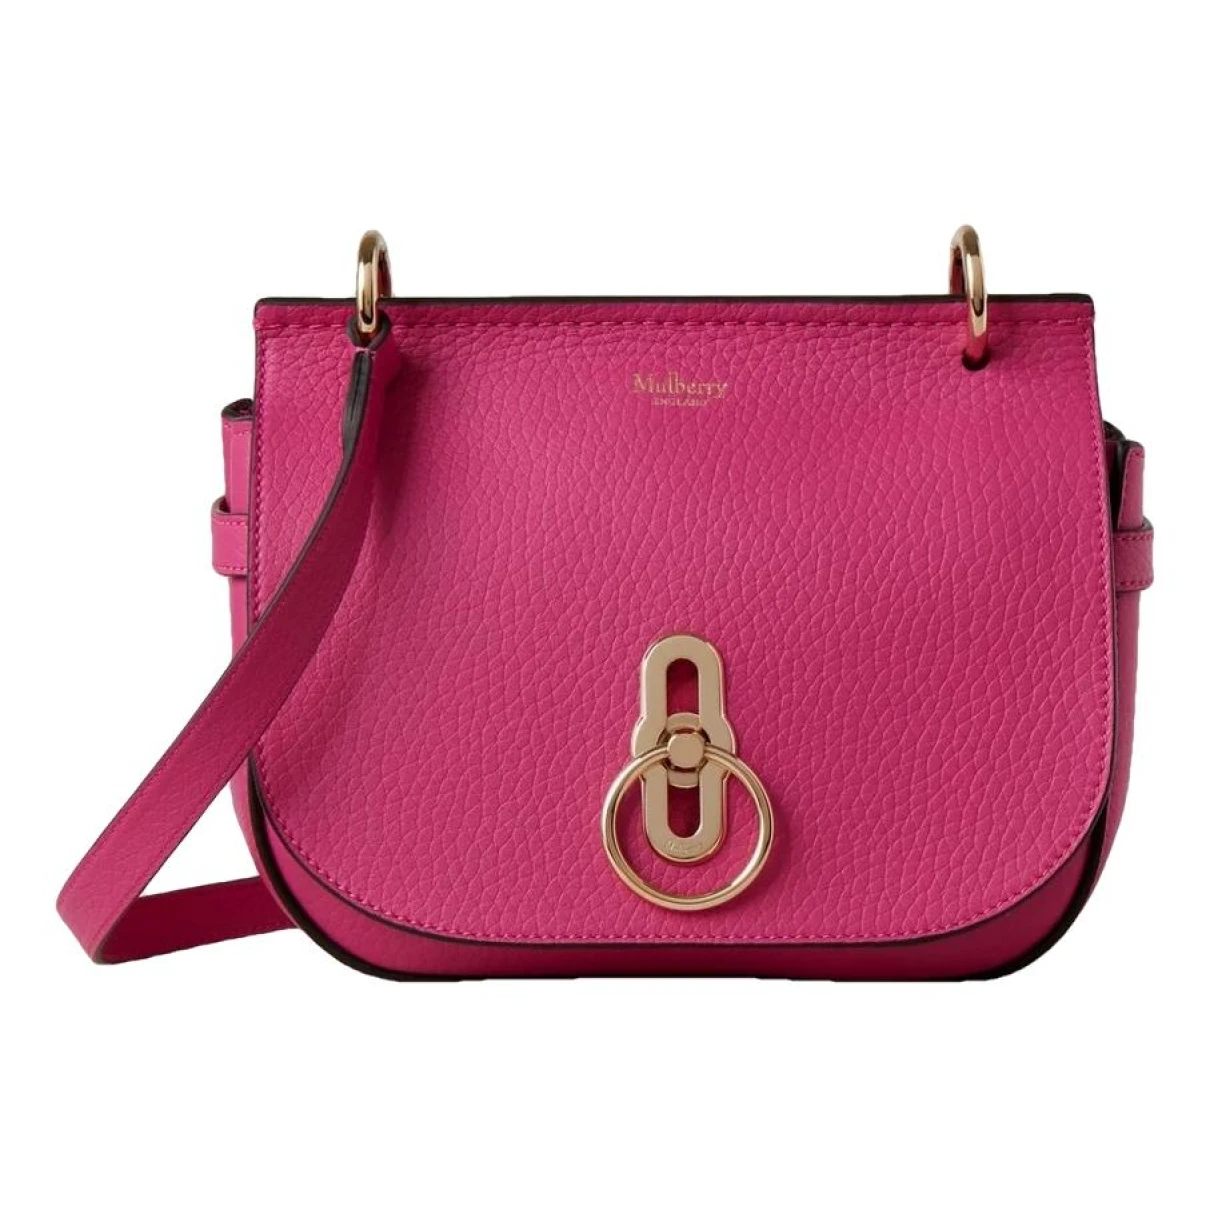 Pre-owned Mulberry Amberley Leather Handbag In Pink